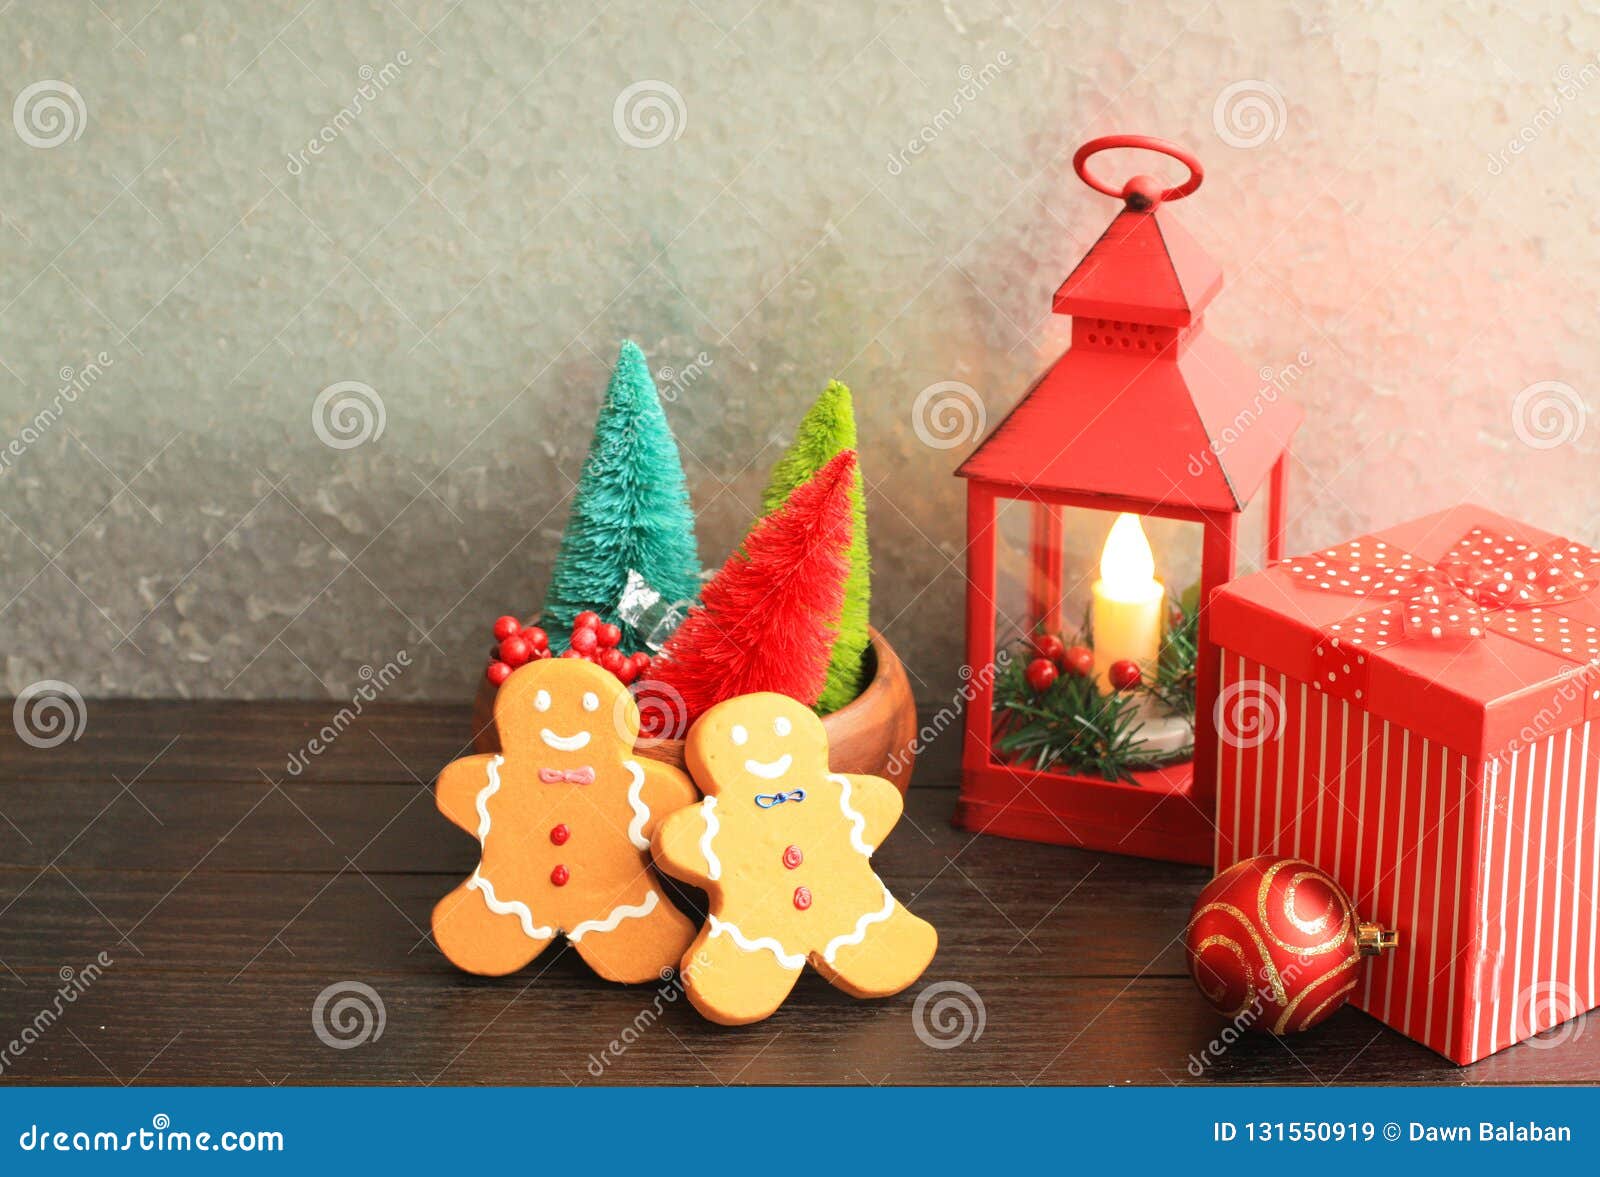 Christmas Lantern Red Colorful Trees and Gingerbread Men Stock Image ...